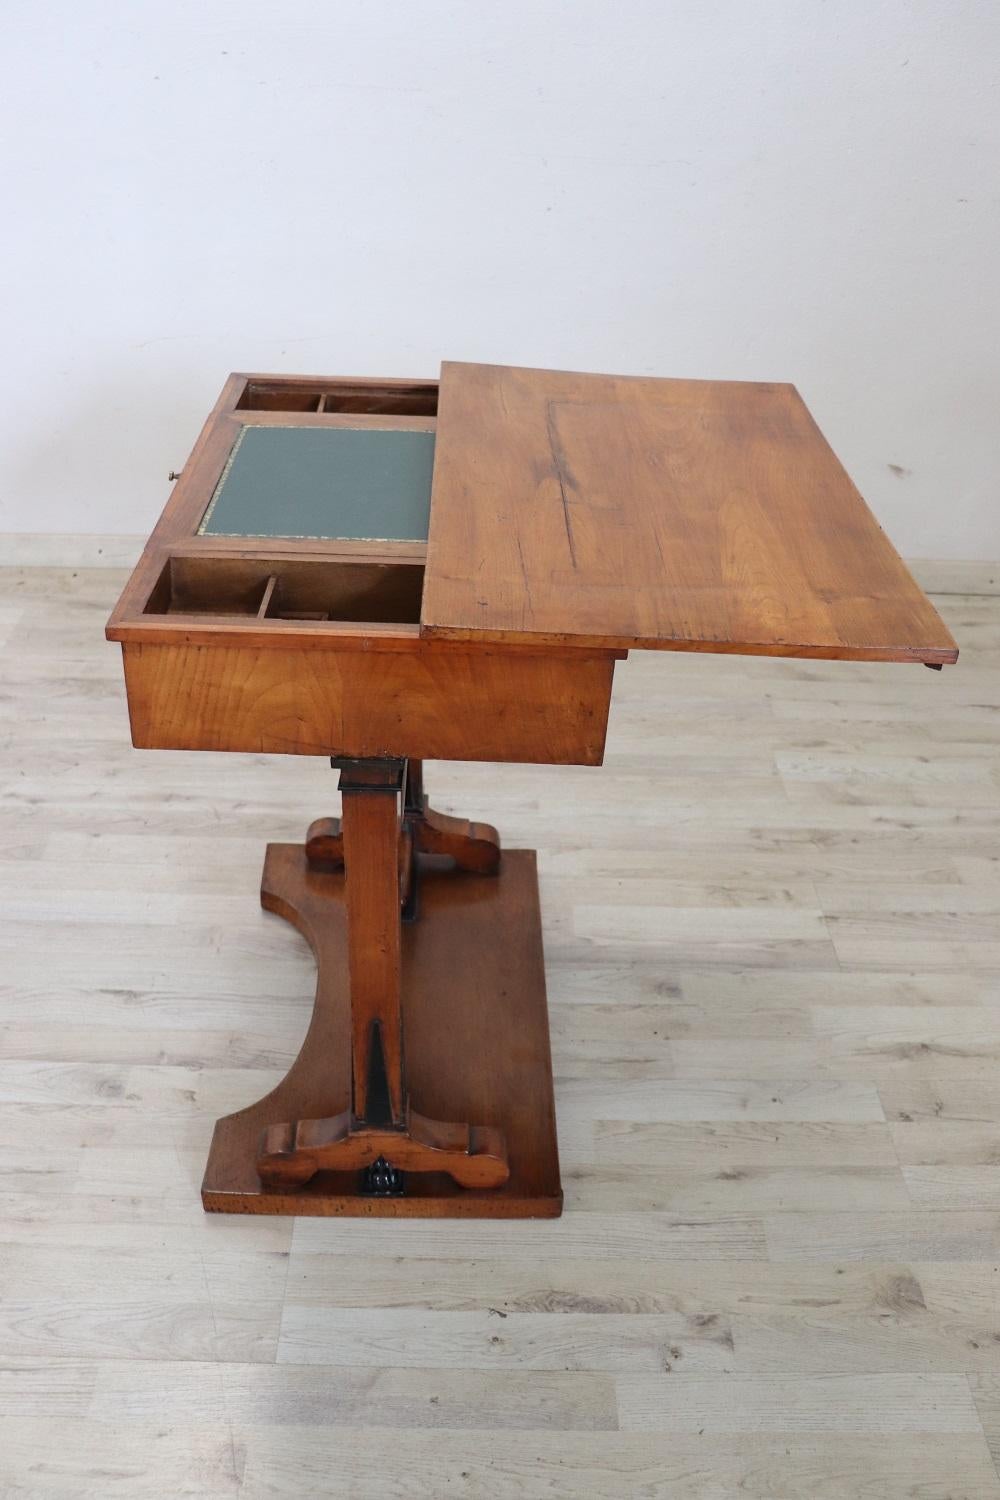 Early 19th Century Empire Cherry Wood Antique Side Table with Internal Desk Top 10